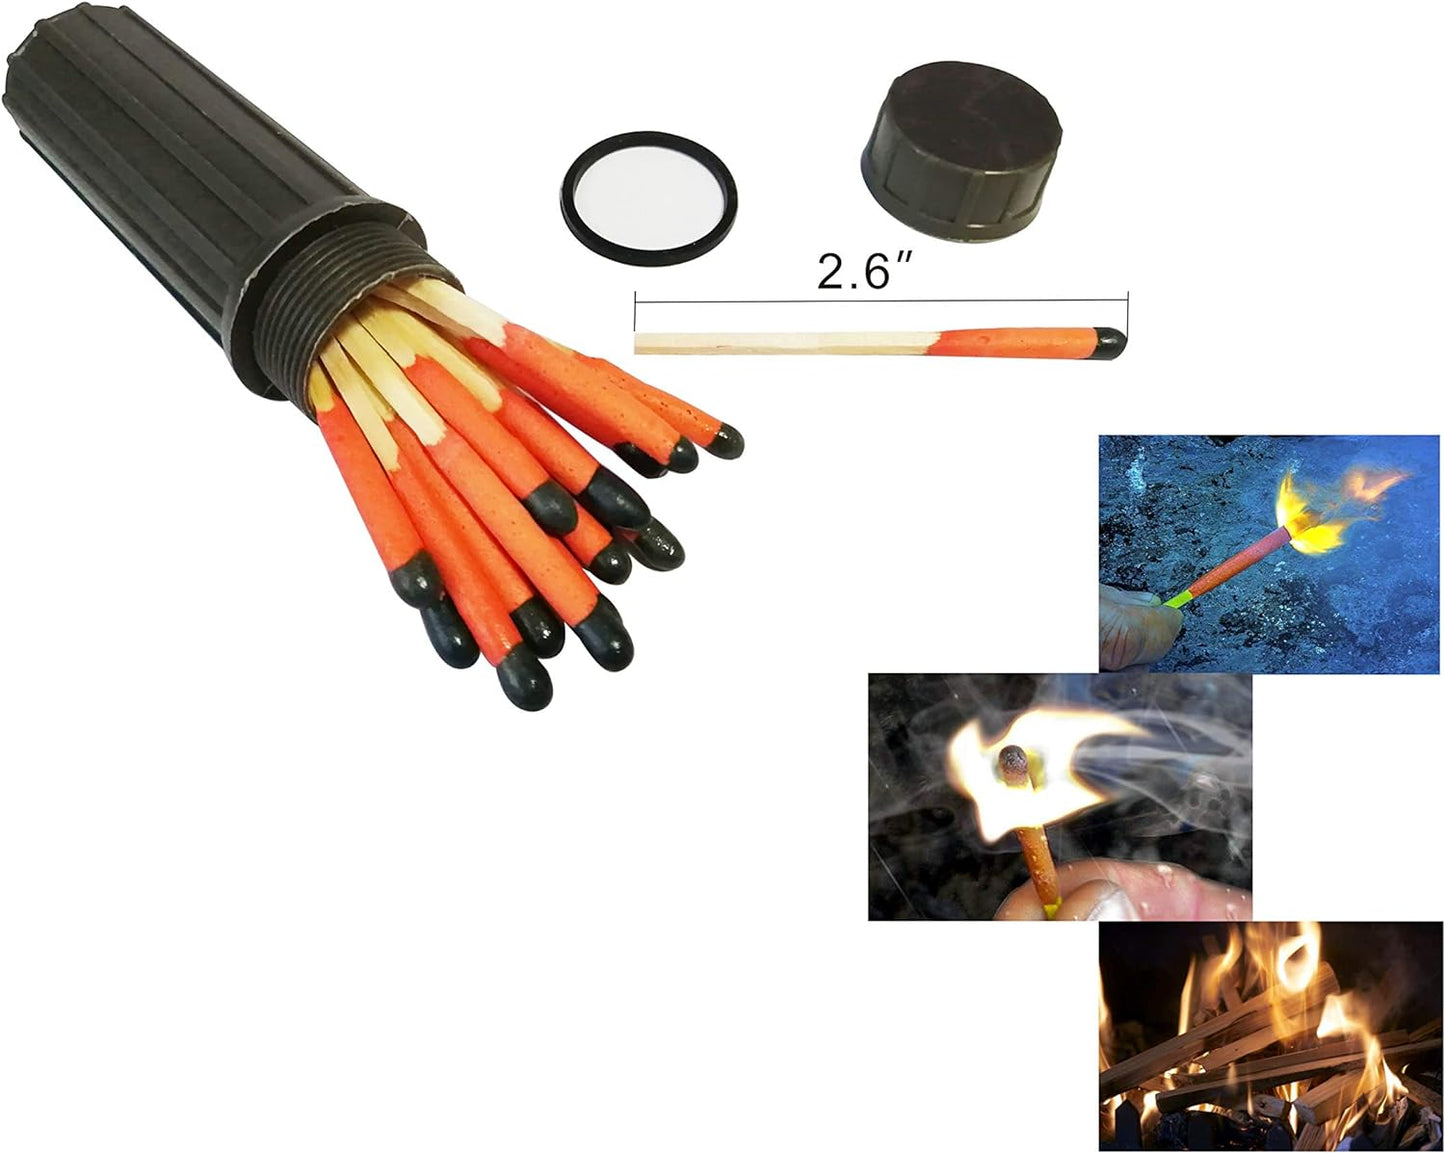 eGreen Fire Starter Weather Proof Matches Ferro Rod Striker Emergency Blanket Saw Wire Multiple Purpose Tool Wax Ropes Waist Bag for Hiking Camping Bushcraft